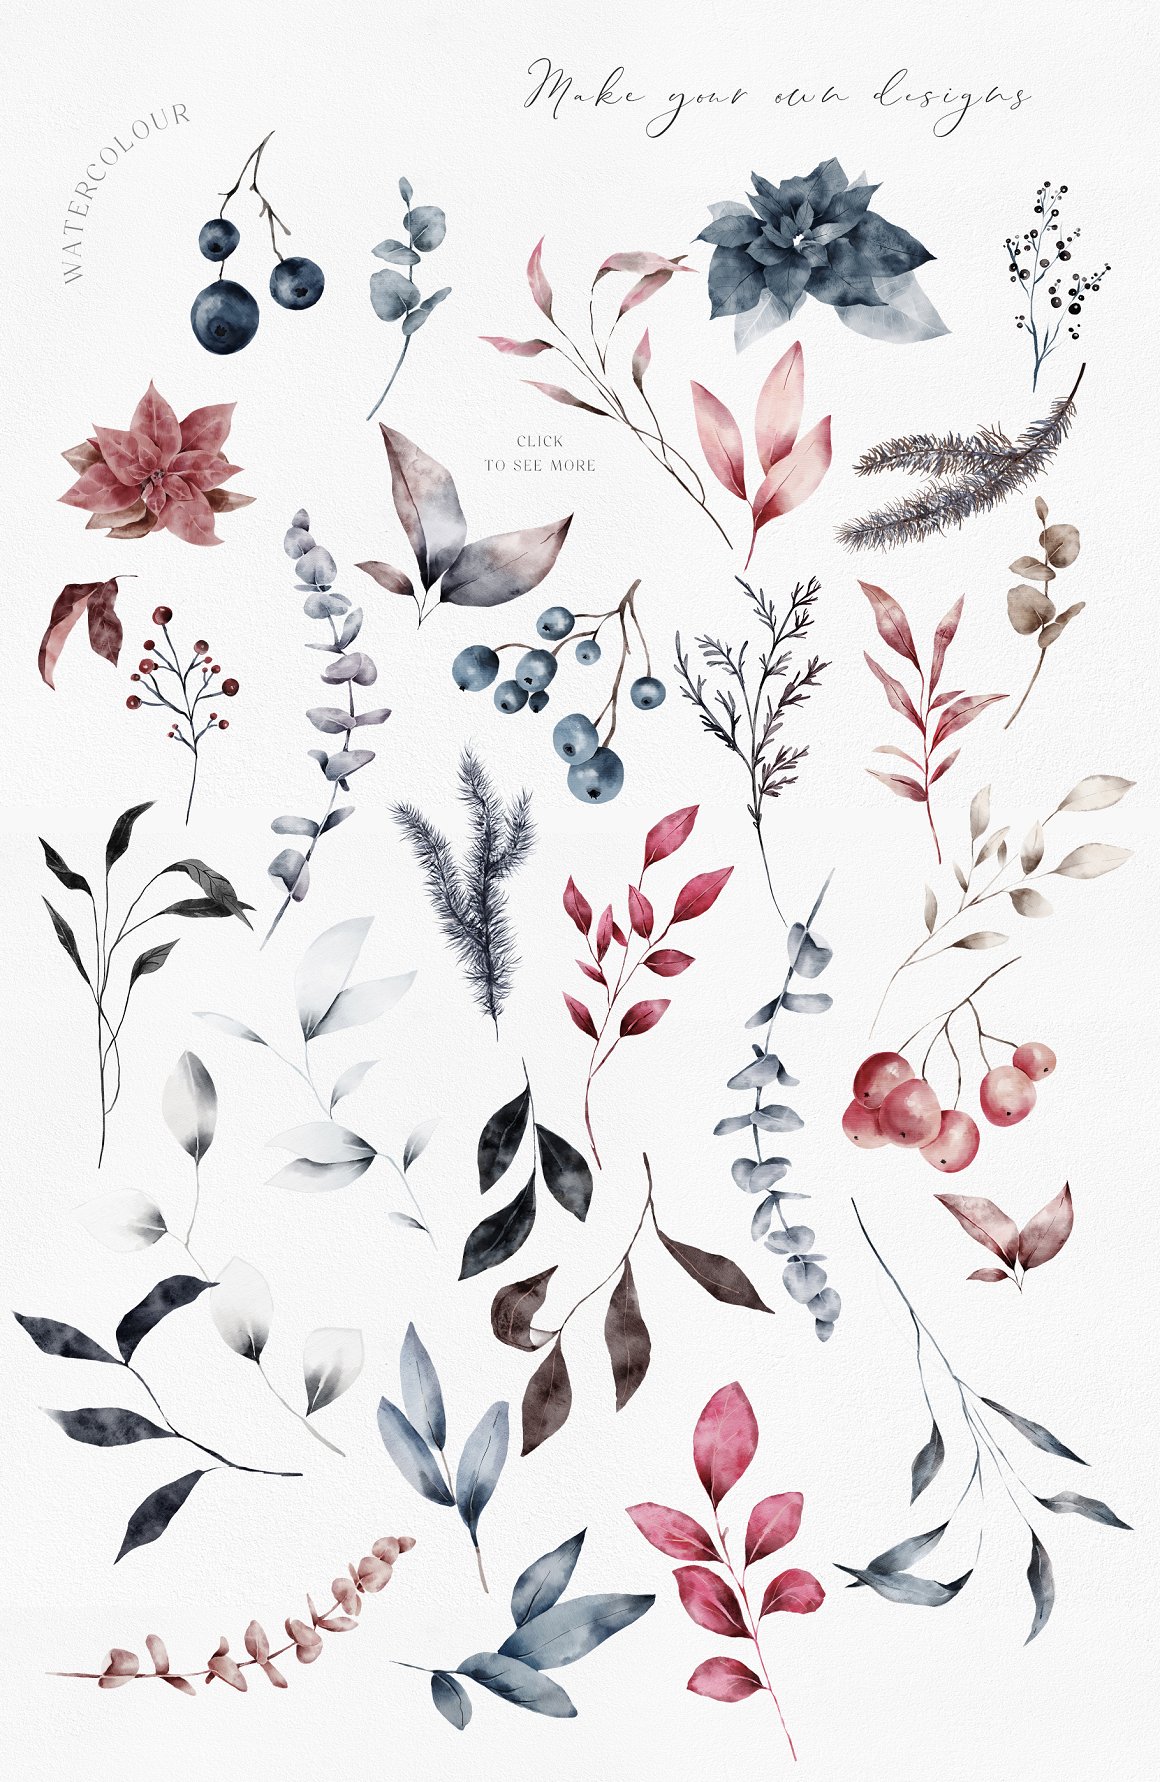 Clipart of different illustrations of winter botanicals.